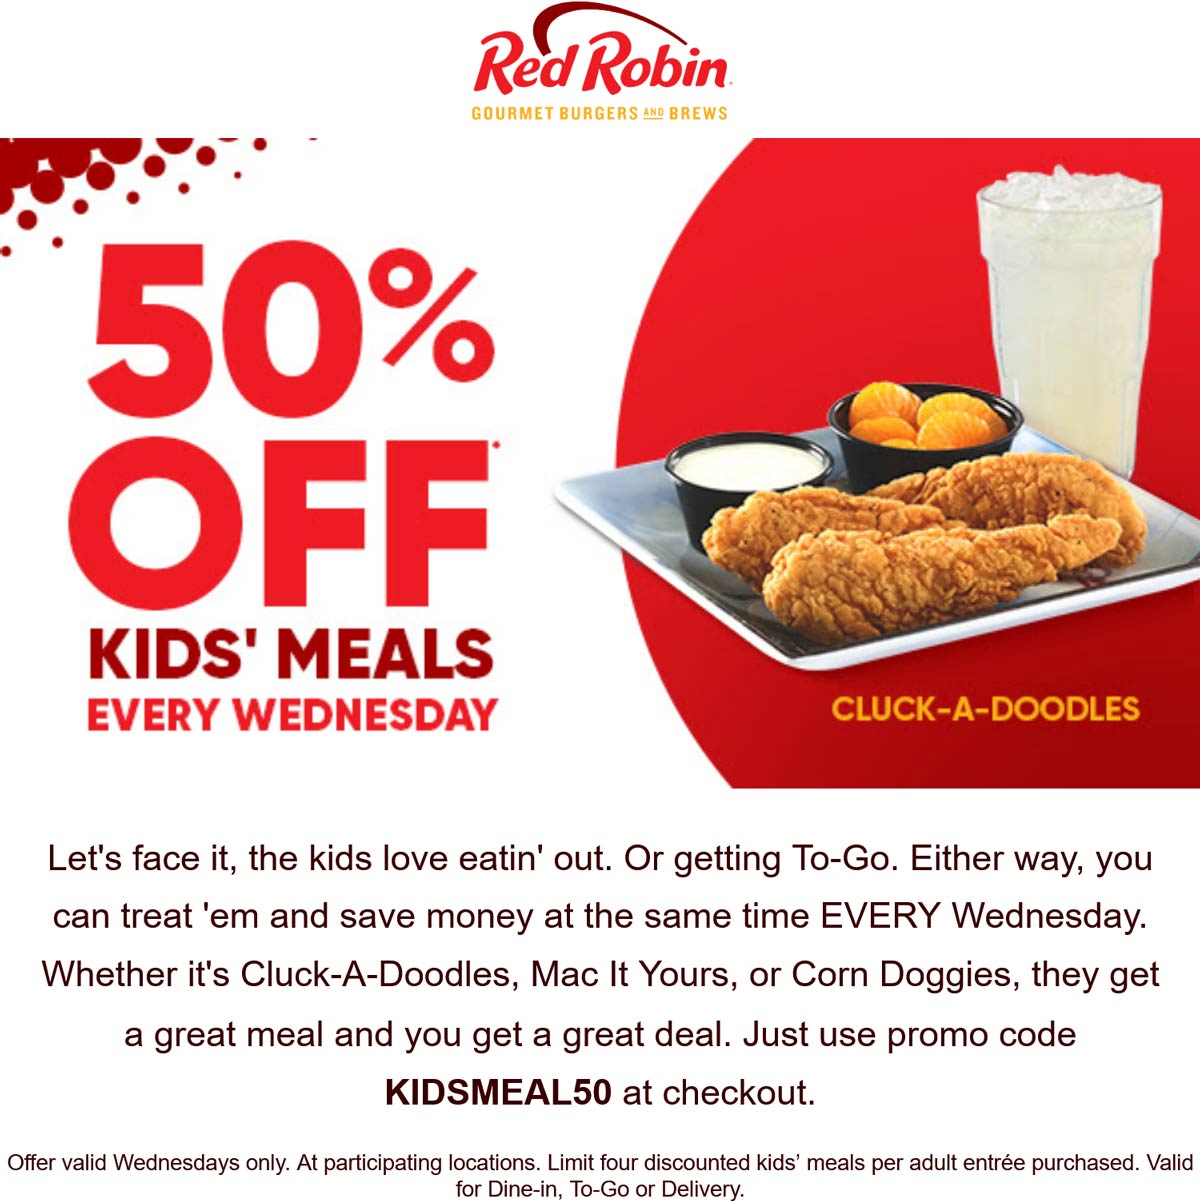 Red Robin restaurants Coupon  Kids meals are 50% off today at Red Robin restaurants via promo code KIDSMEAL50 #redrobin 